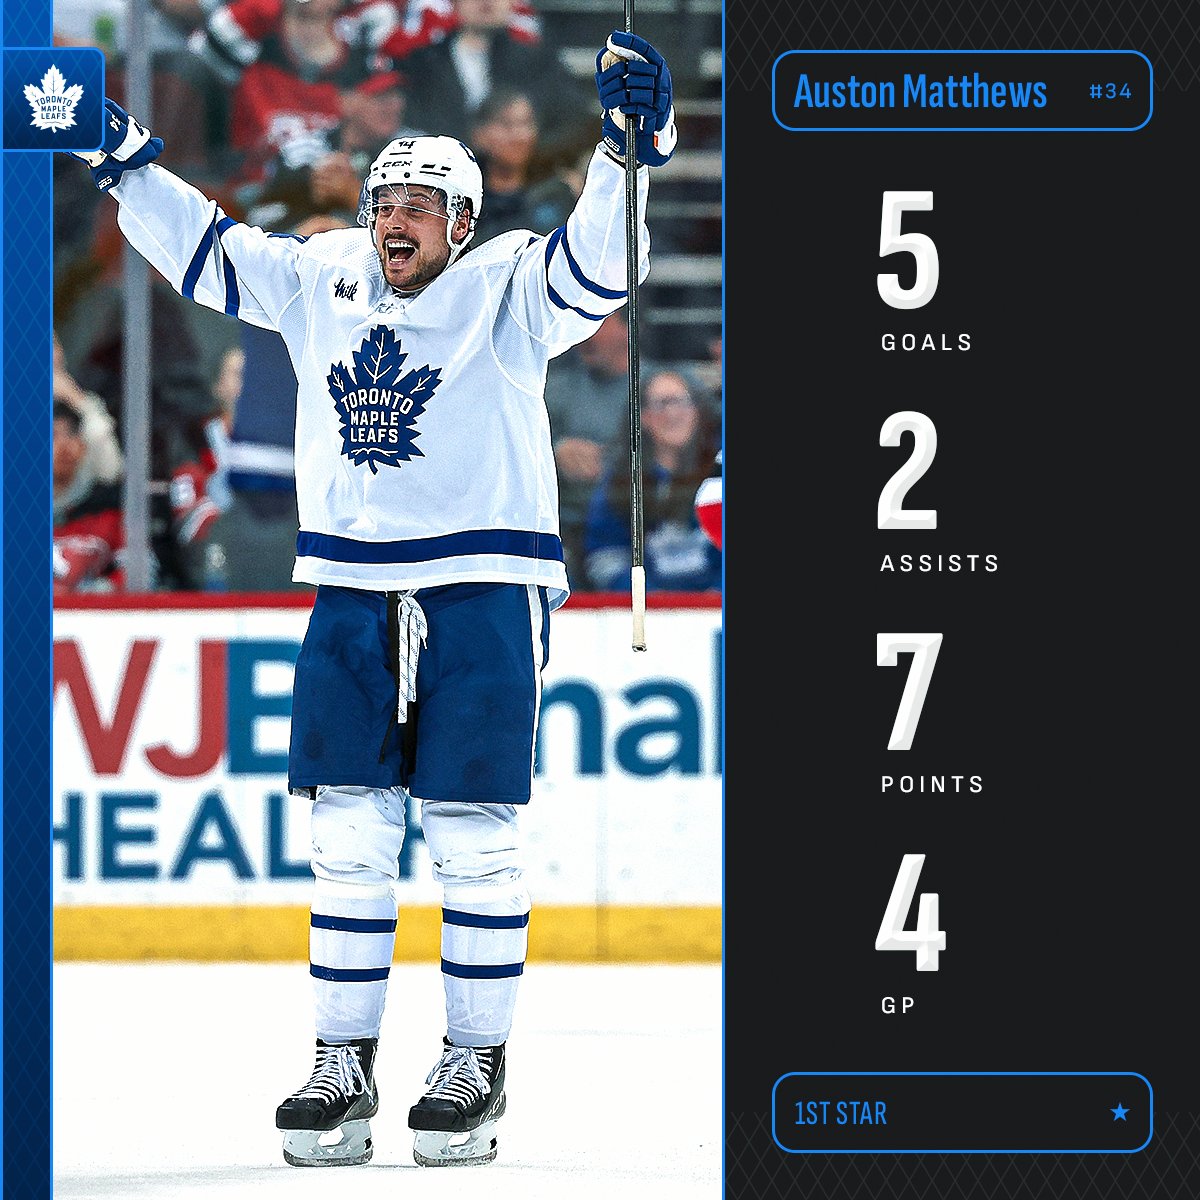 @MapleLeafs @PredsNHL @NHLFlames ⭐ Matthews shared the NHL lead in goals last week, extending his goal streak to a career-best 8 games since March 30, and the @MapleLeafs forward now sits one shy of the 15th 70-goal season in NHL history. #NHLStats: media.nhl.com/public/news/17…